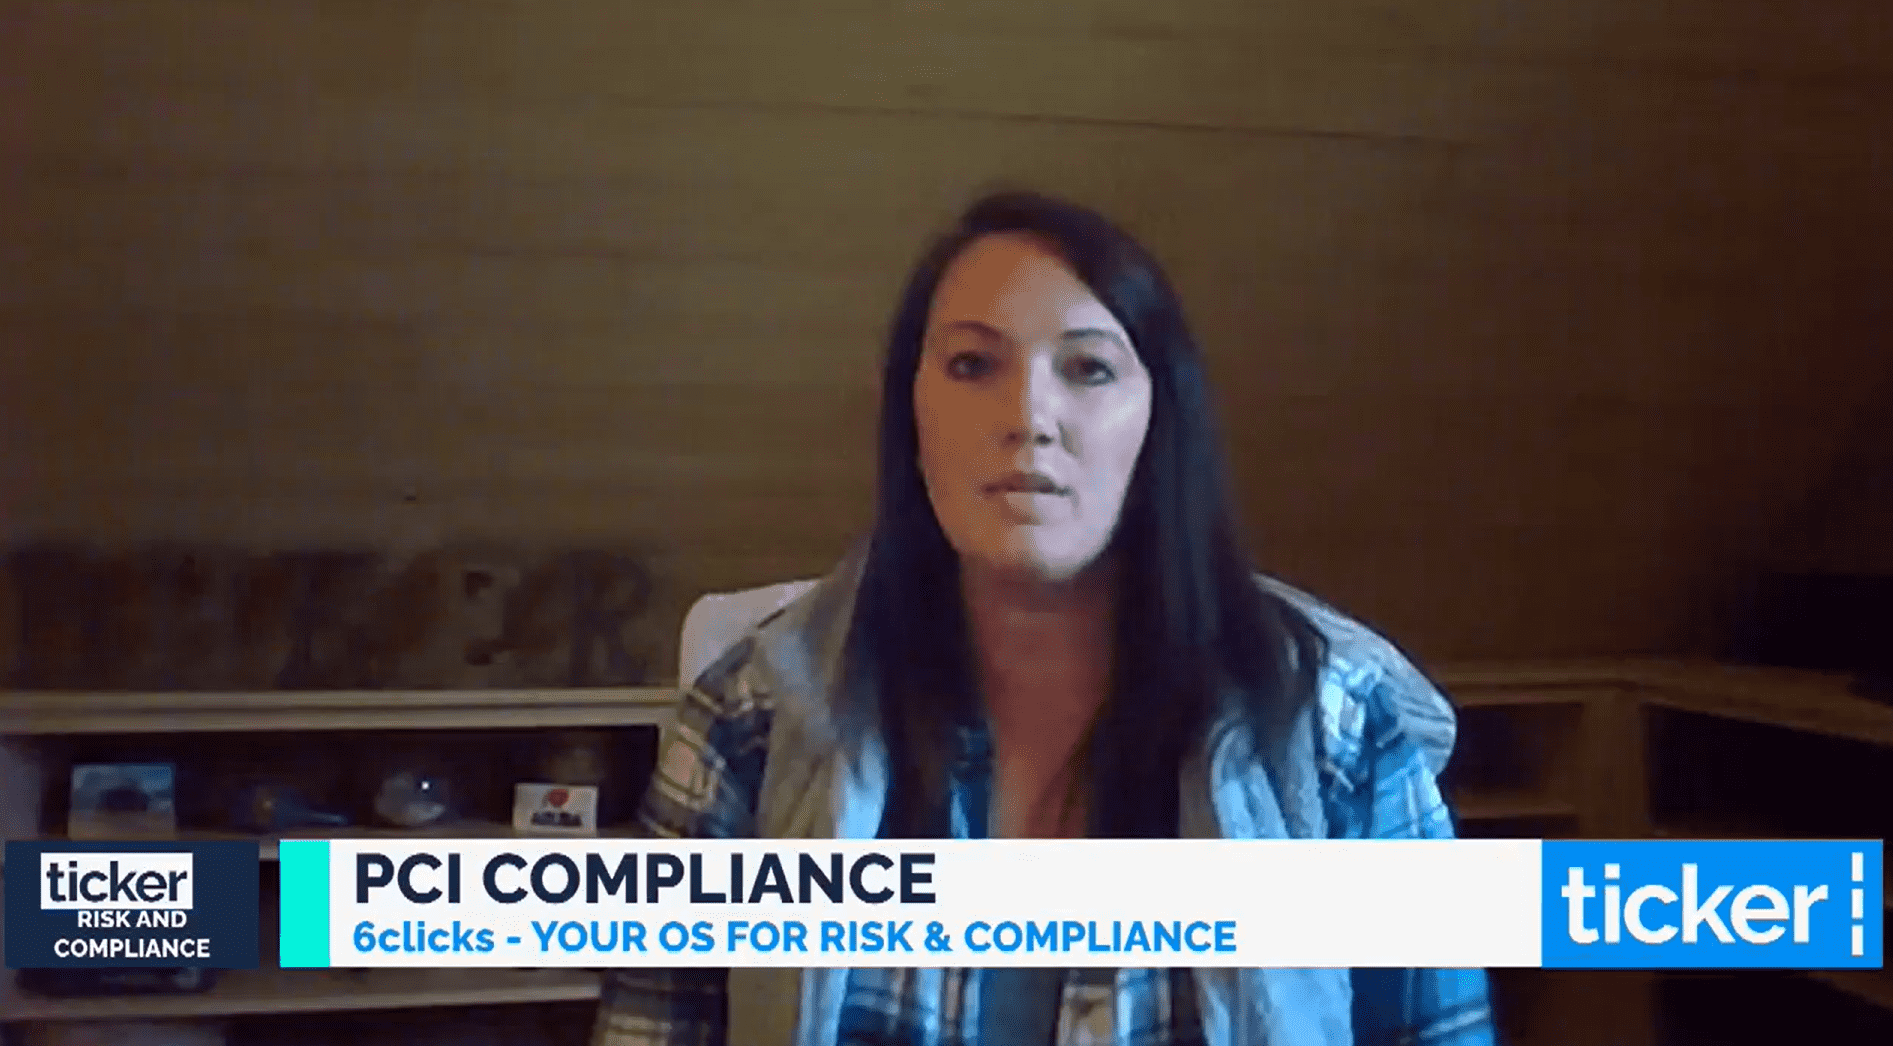 Expert Guidance to Automate PCI Compliance Reporting